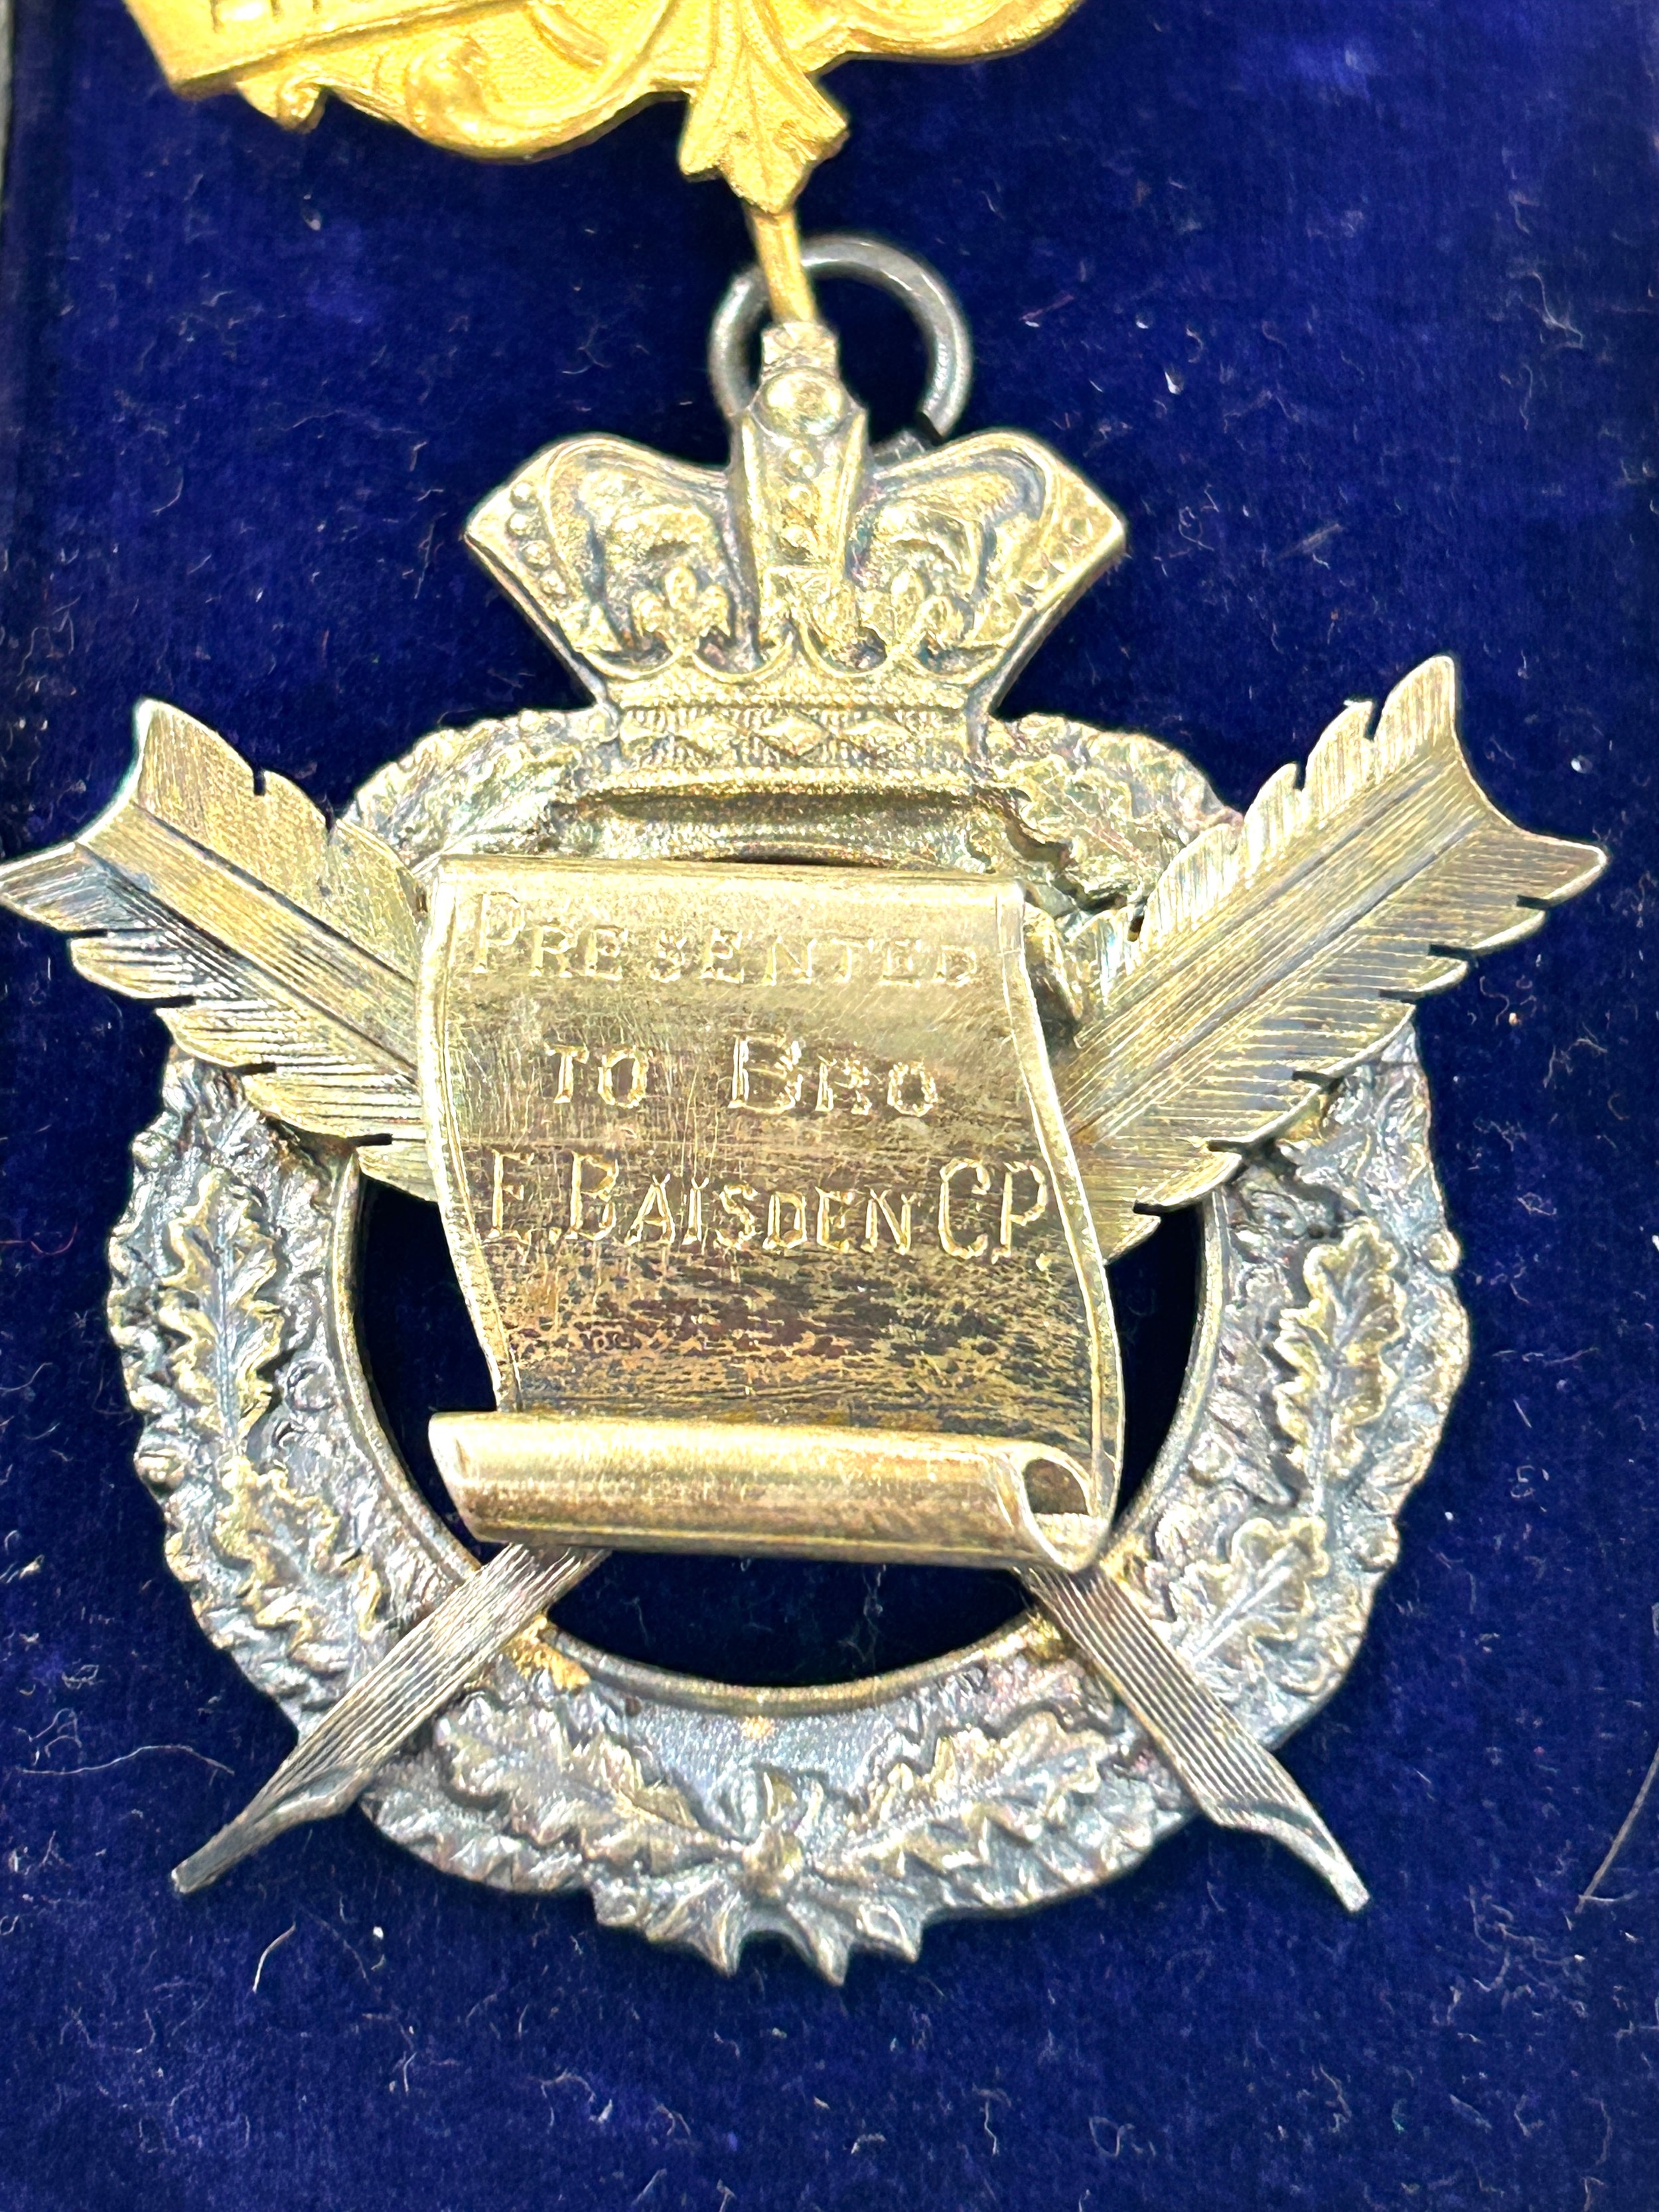 Boxed masonic silver service rendered medal june 29th 1928 presented to Bro E. Baisden by the - Image 2 of 5